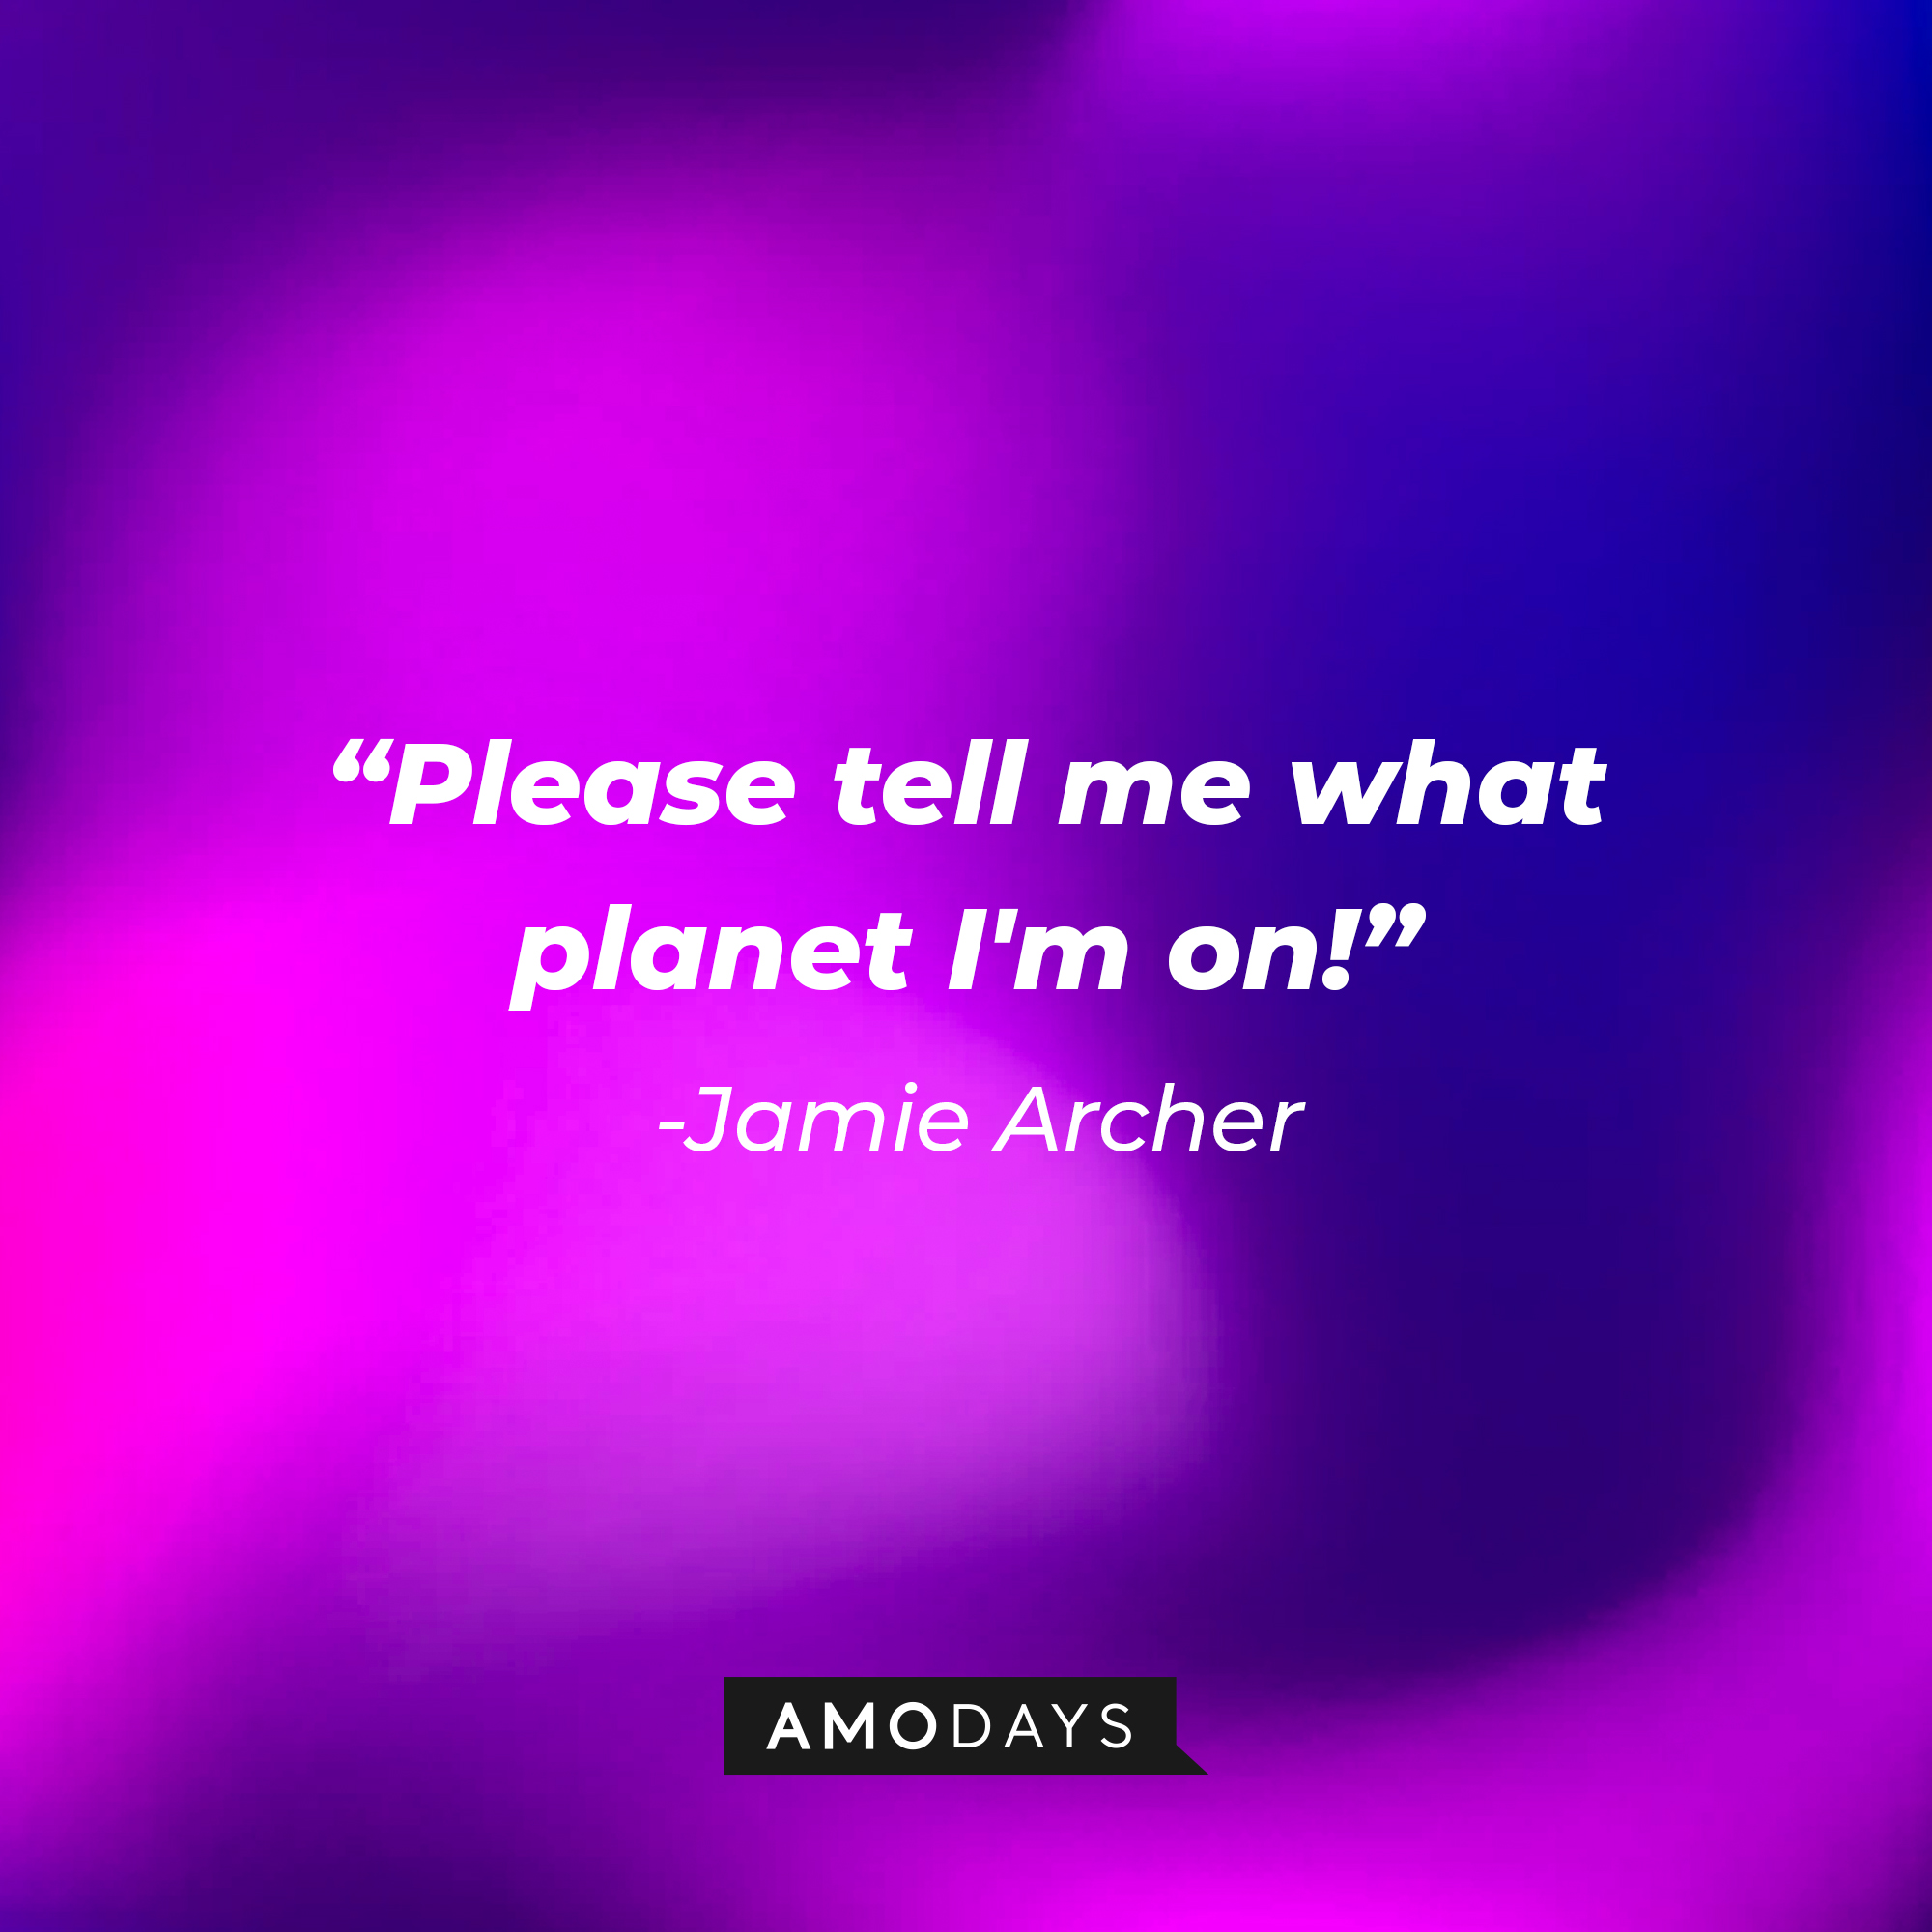 Jamie Archer's quote: “Please tell me what planet I'm on!” : Source: Amodays